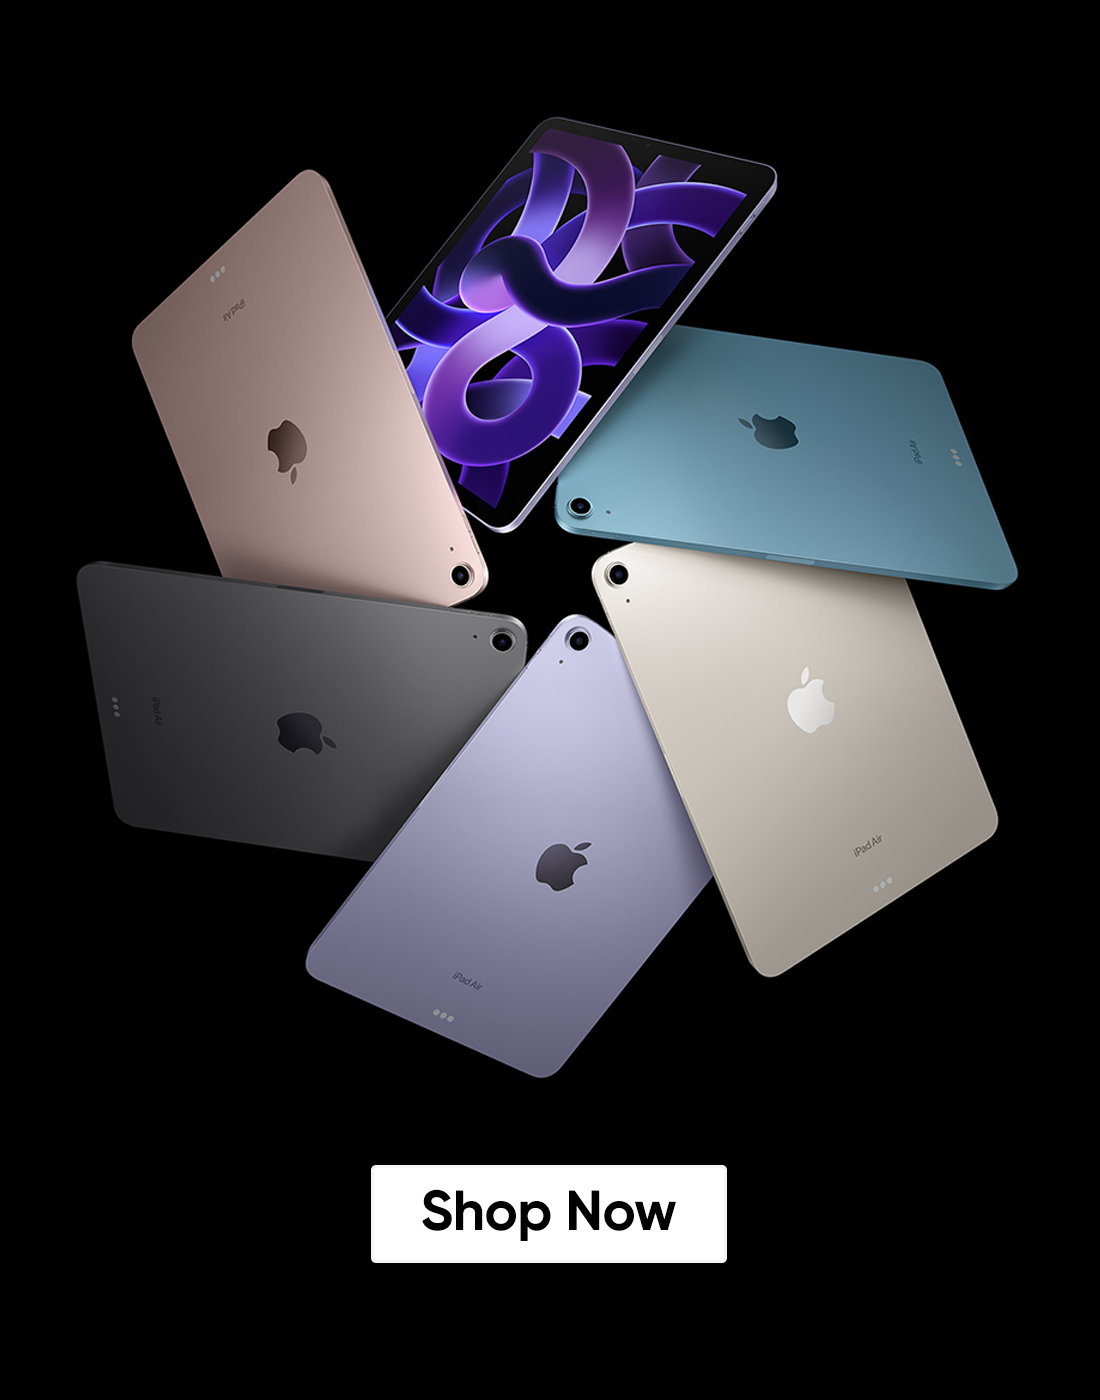 Get the latest iPad series on istore.mu in mauritius at the bestest deal. Get delivery option and International warranty World wide.